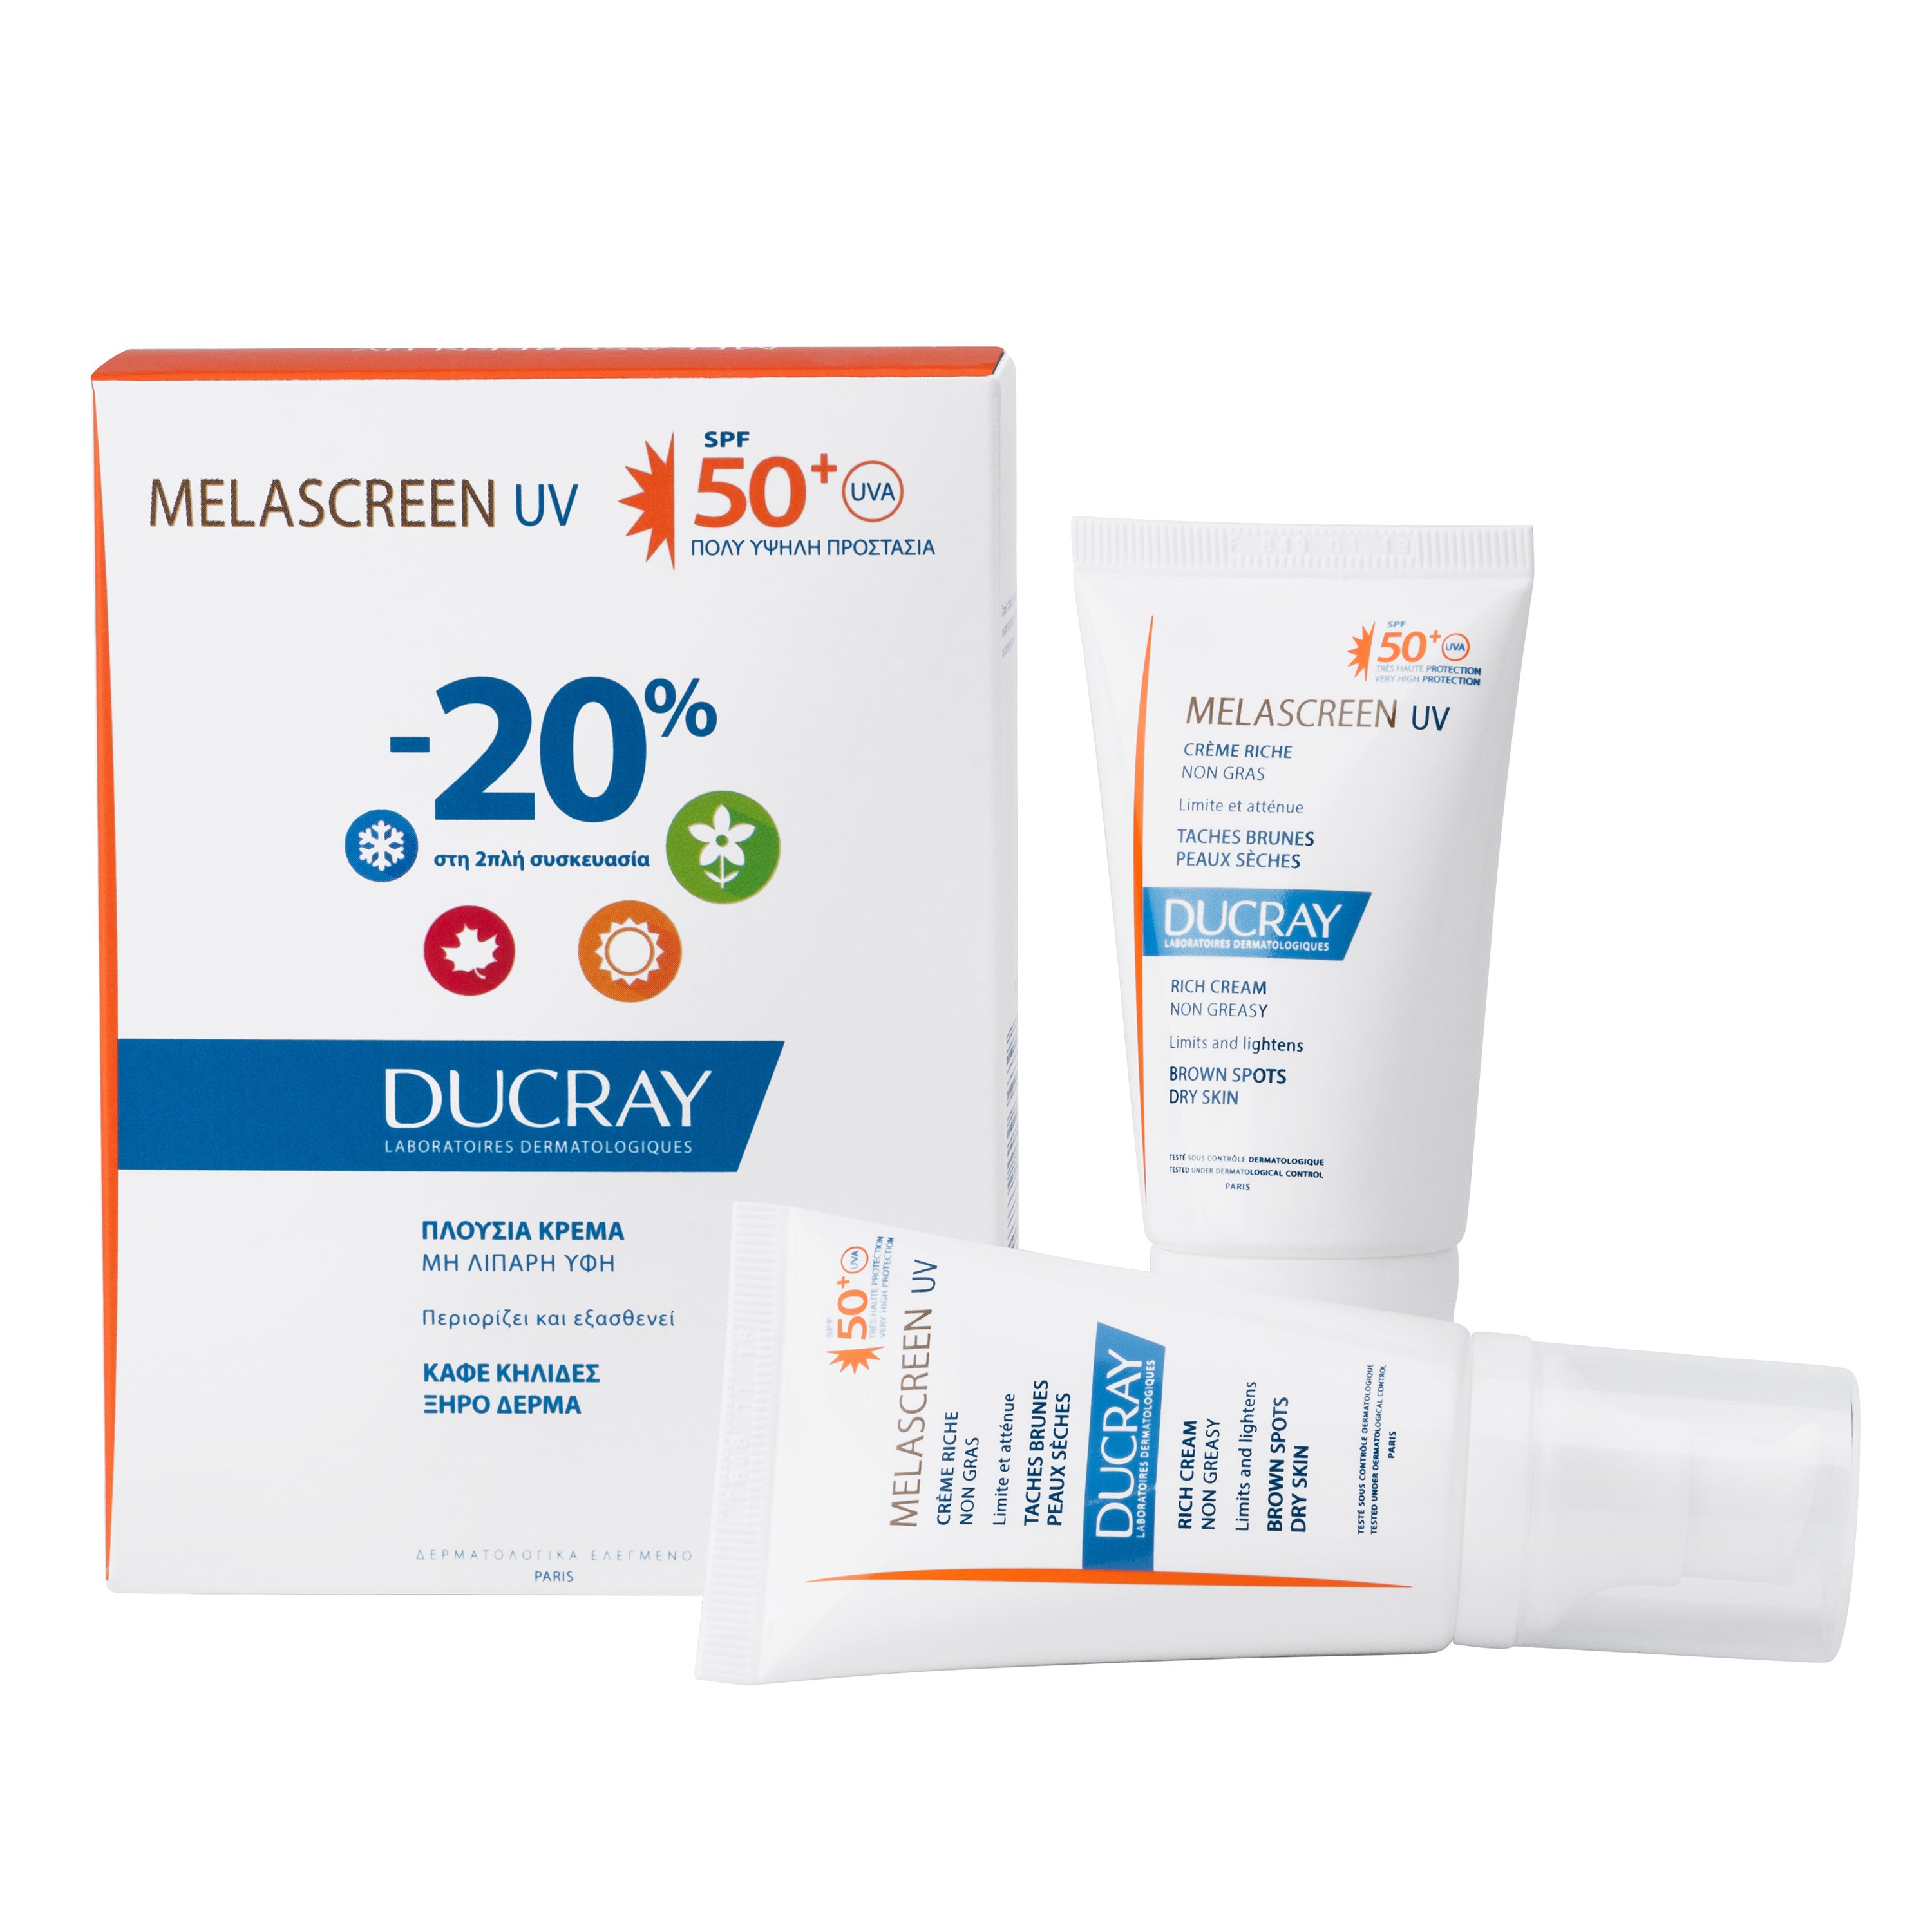 Ducray Duo Melascreen UV Creme Rich Spf50+ Dry Touch Πλούσια...